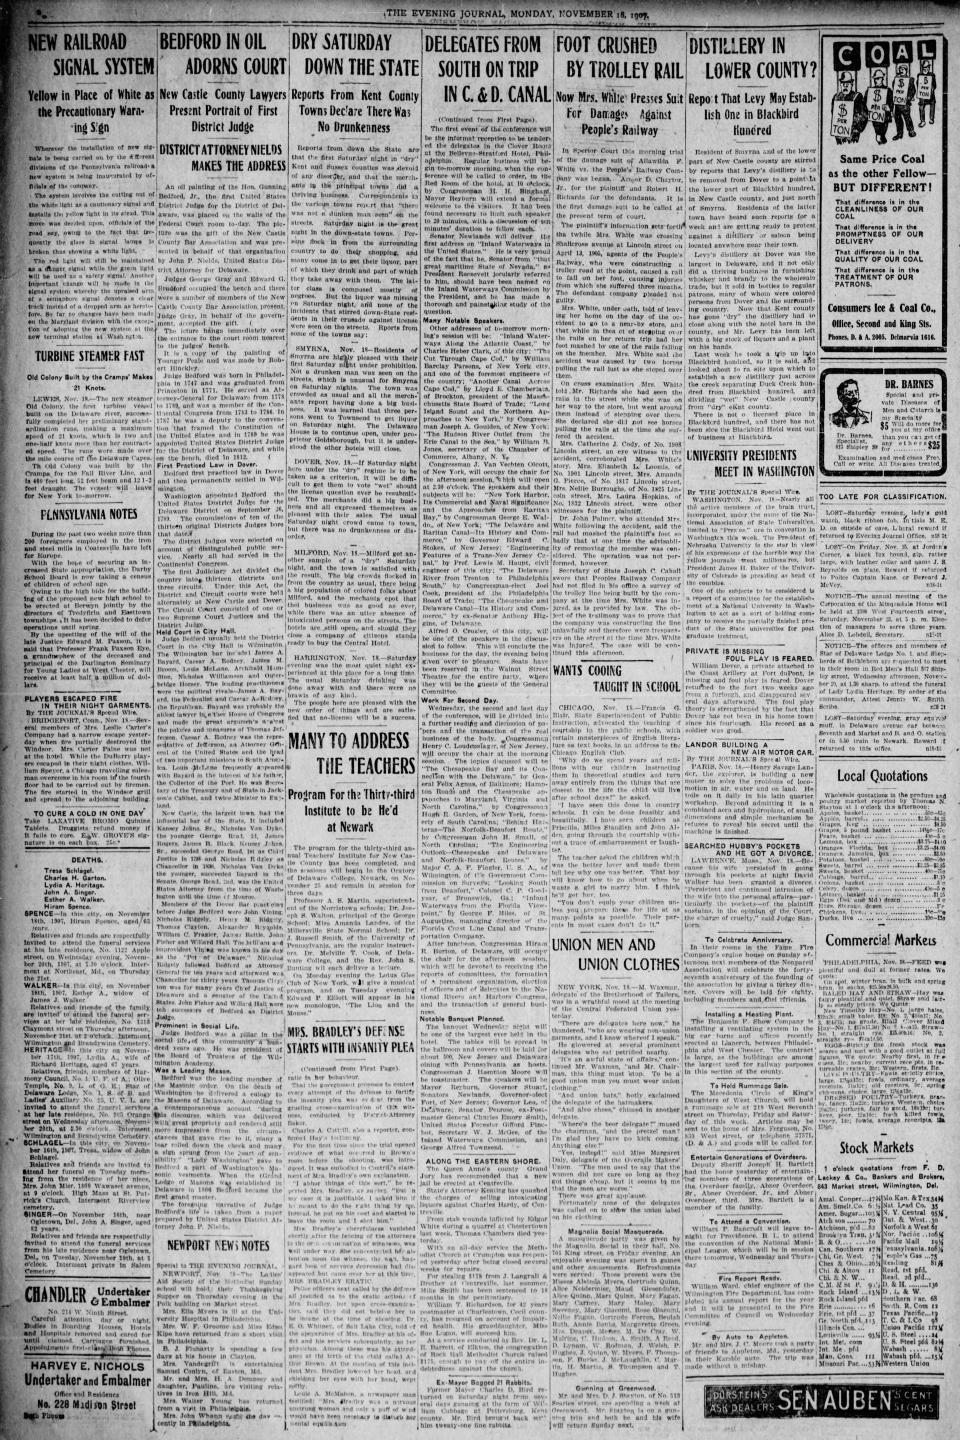 Page 2 of The Evening News from Nov. 18, 1907.